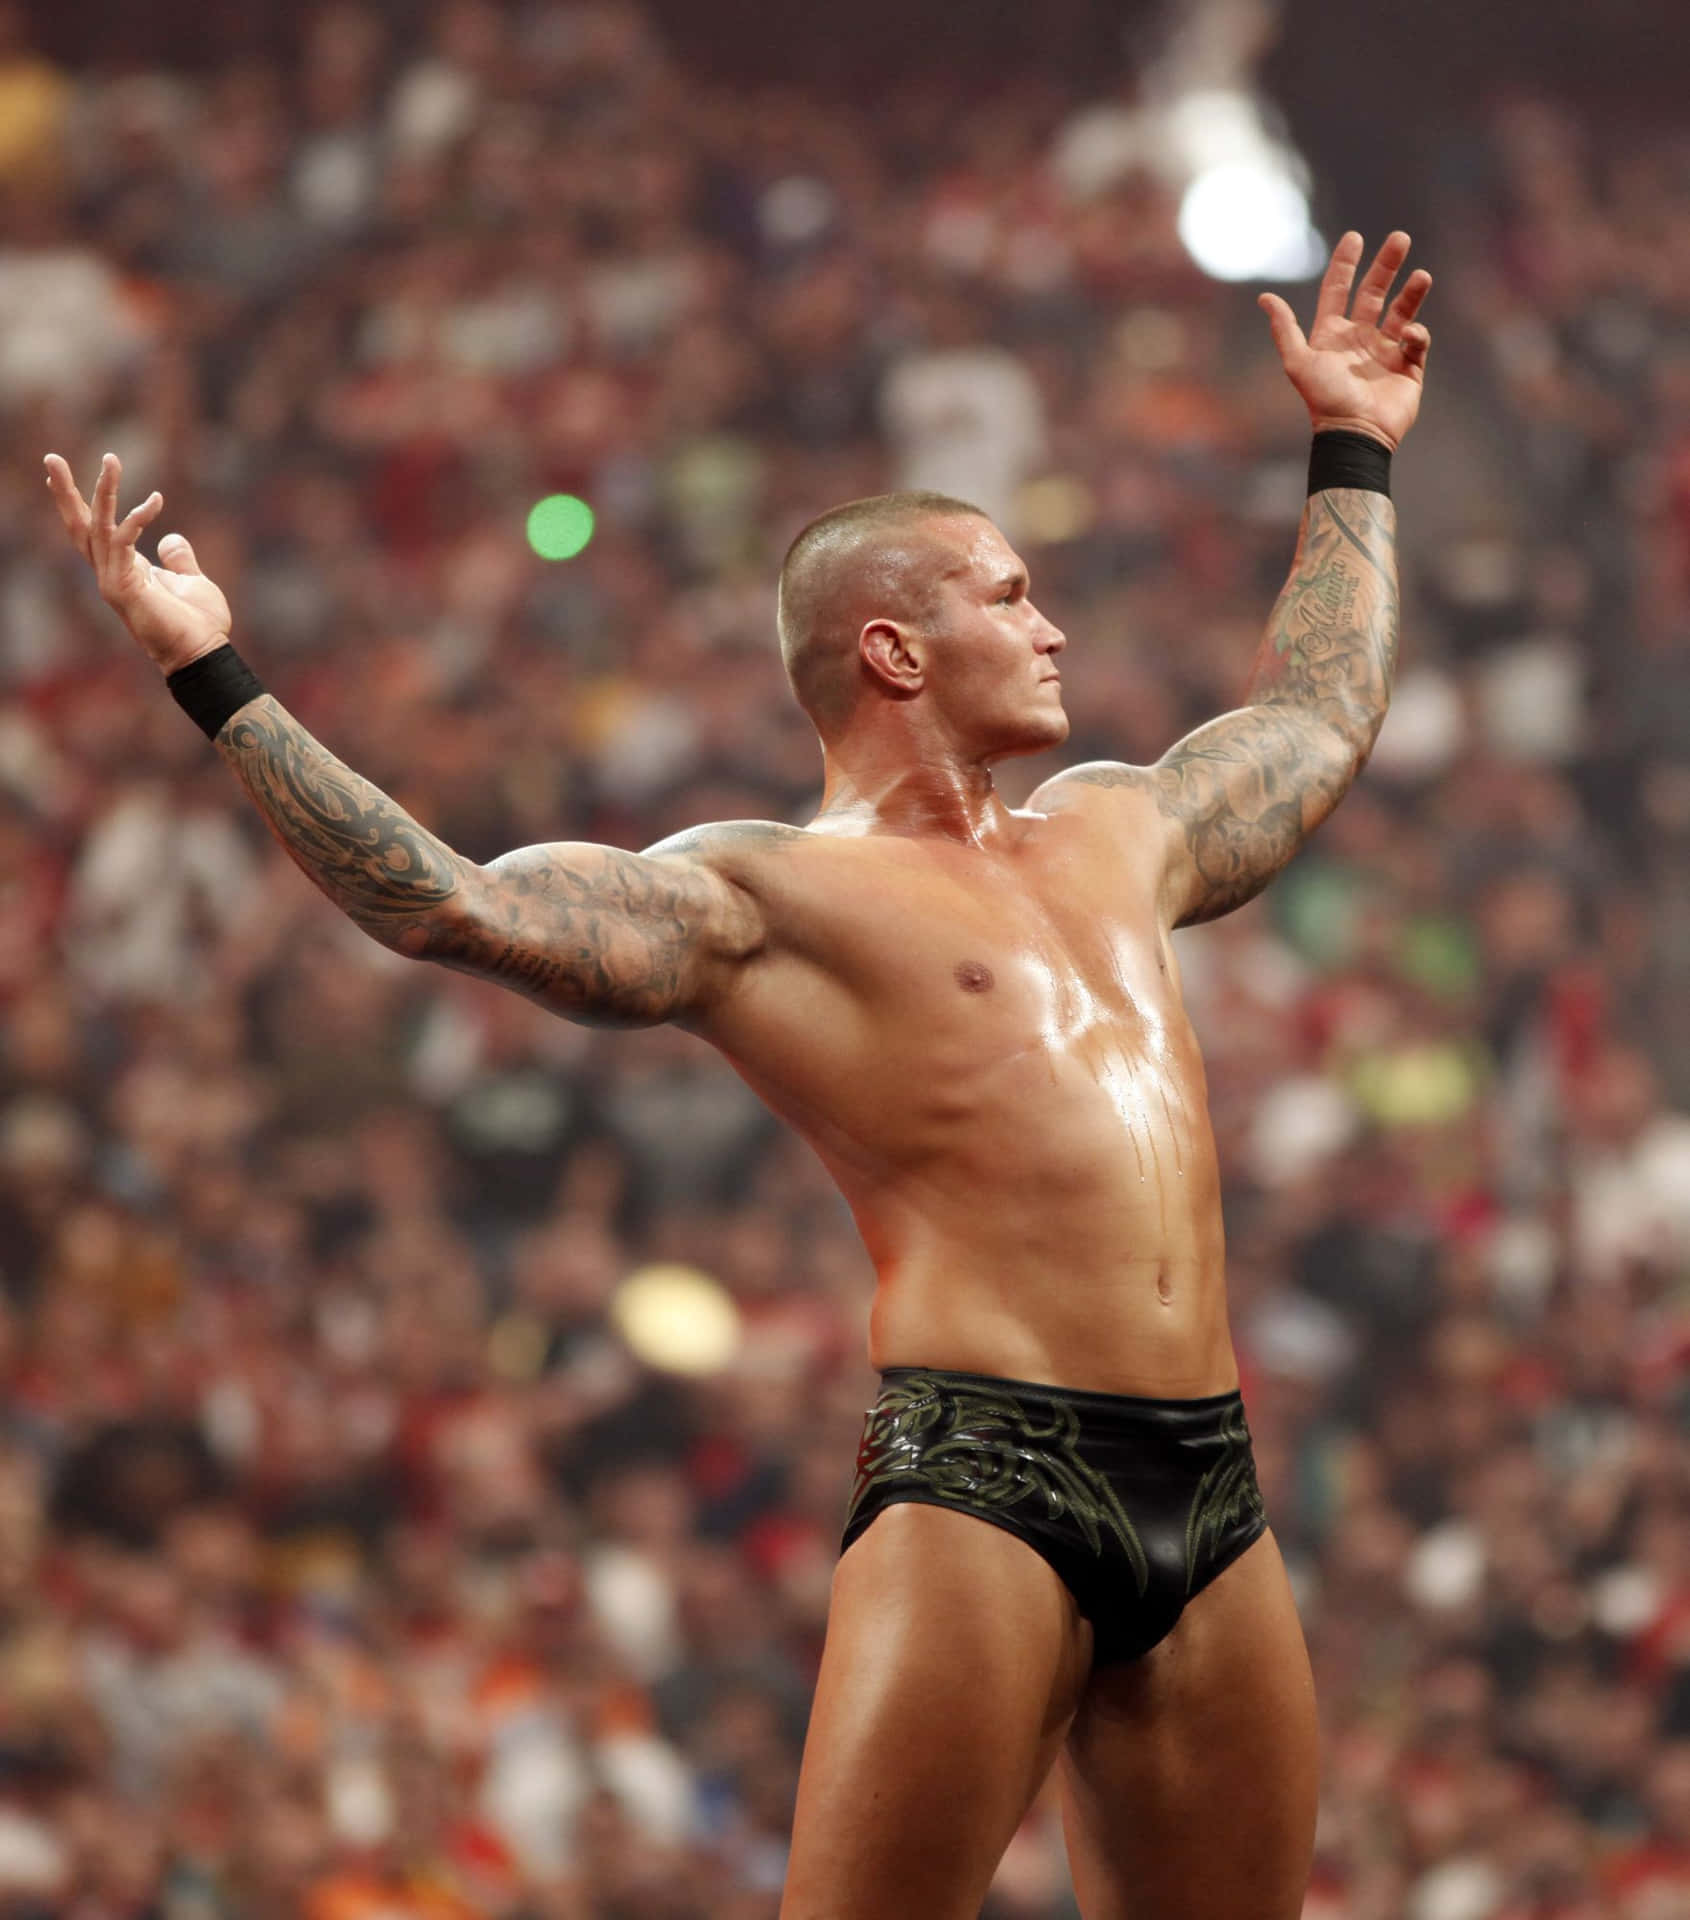 The Viper, Randy Orton, Stares Down His Adversary Background